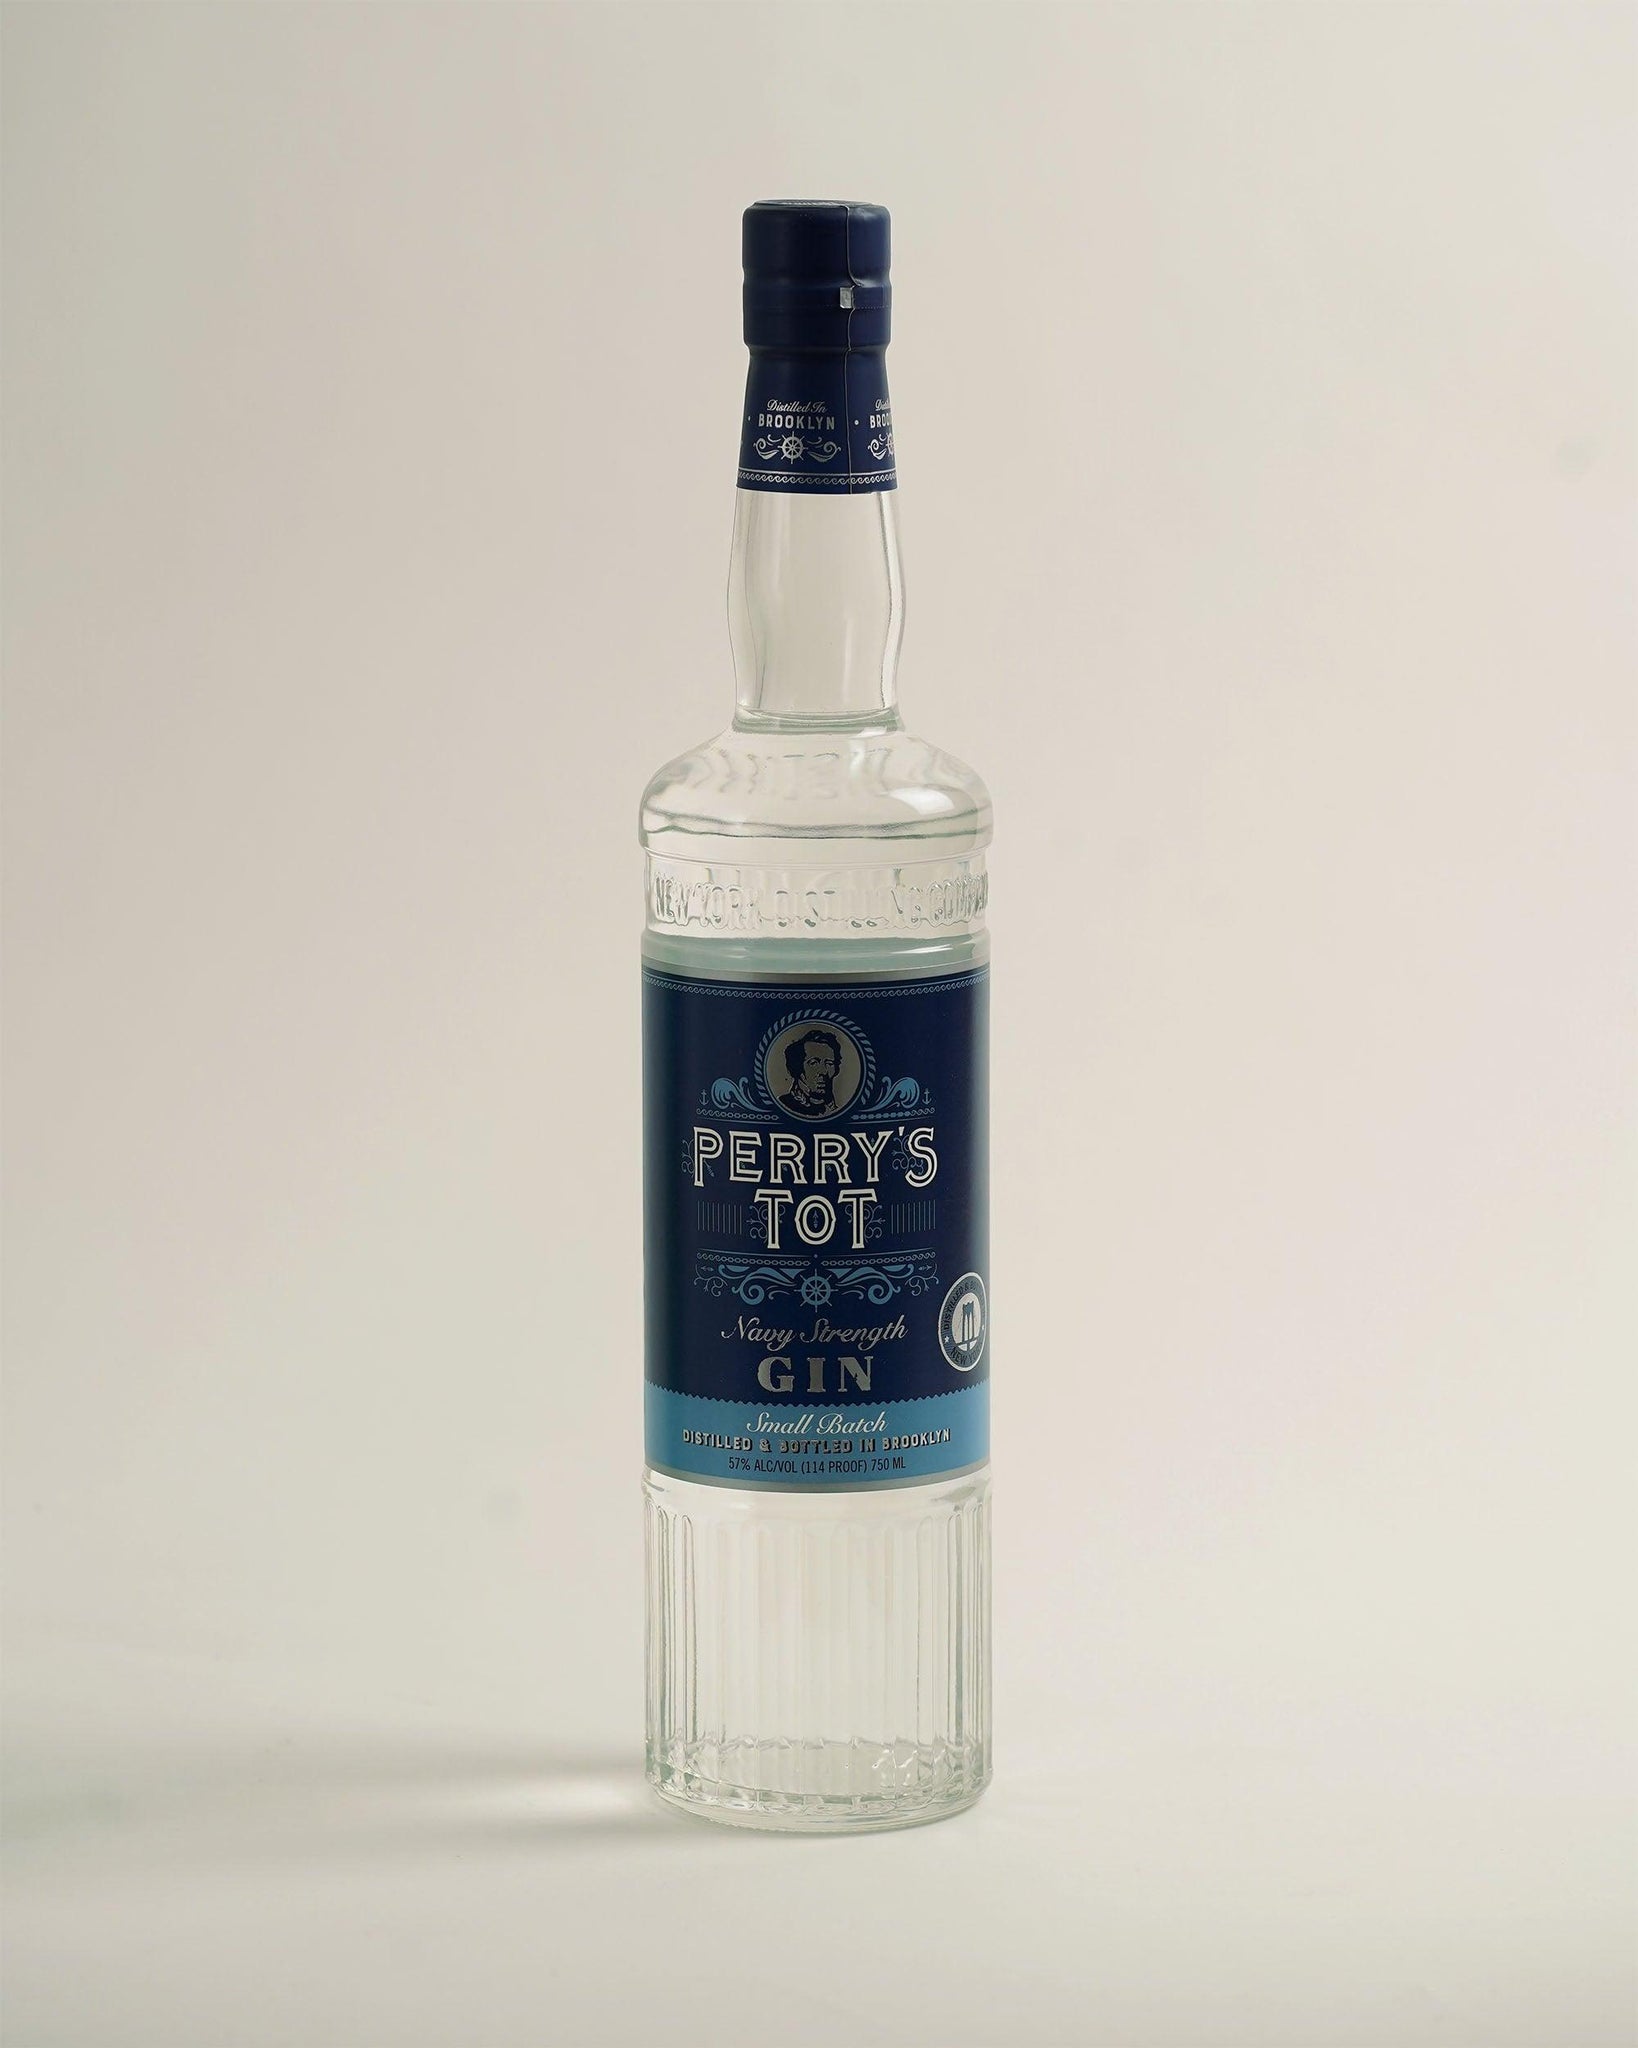 New York Distilling Company 'Perry's Tot' Gin - Folkways